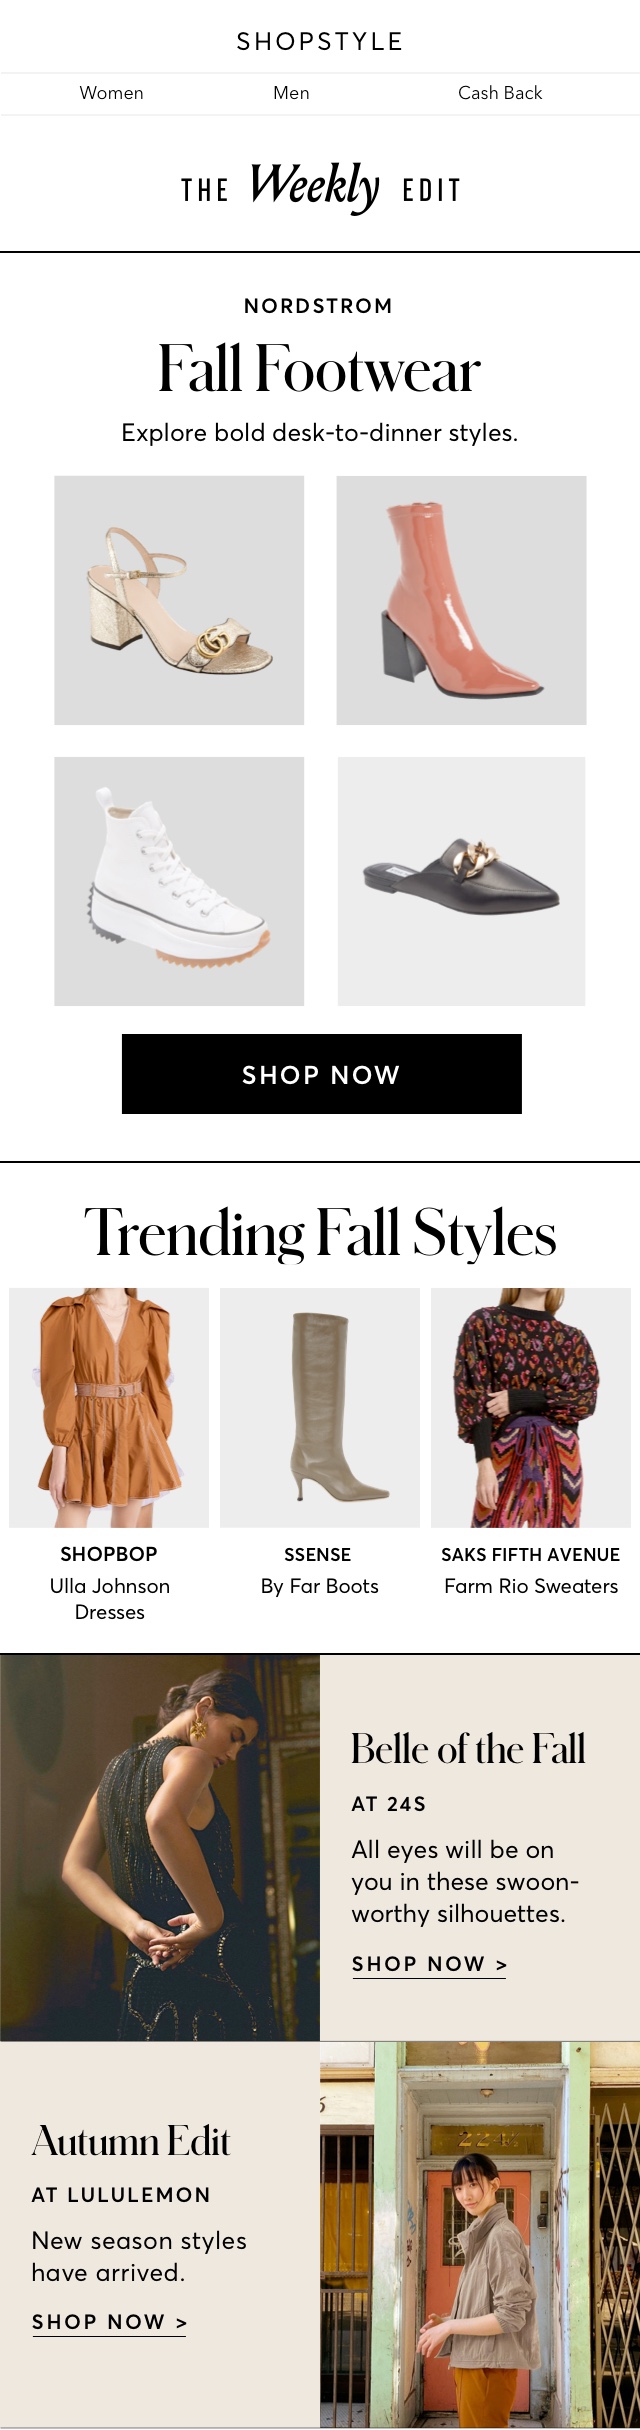 shopstyle email